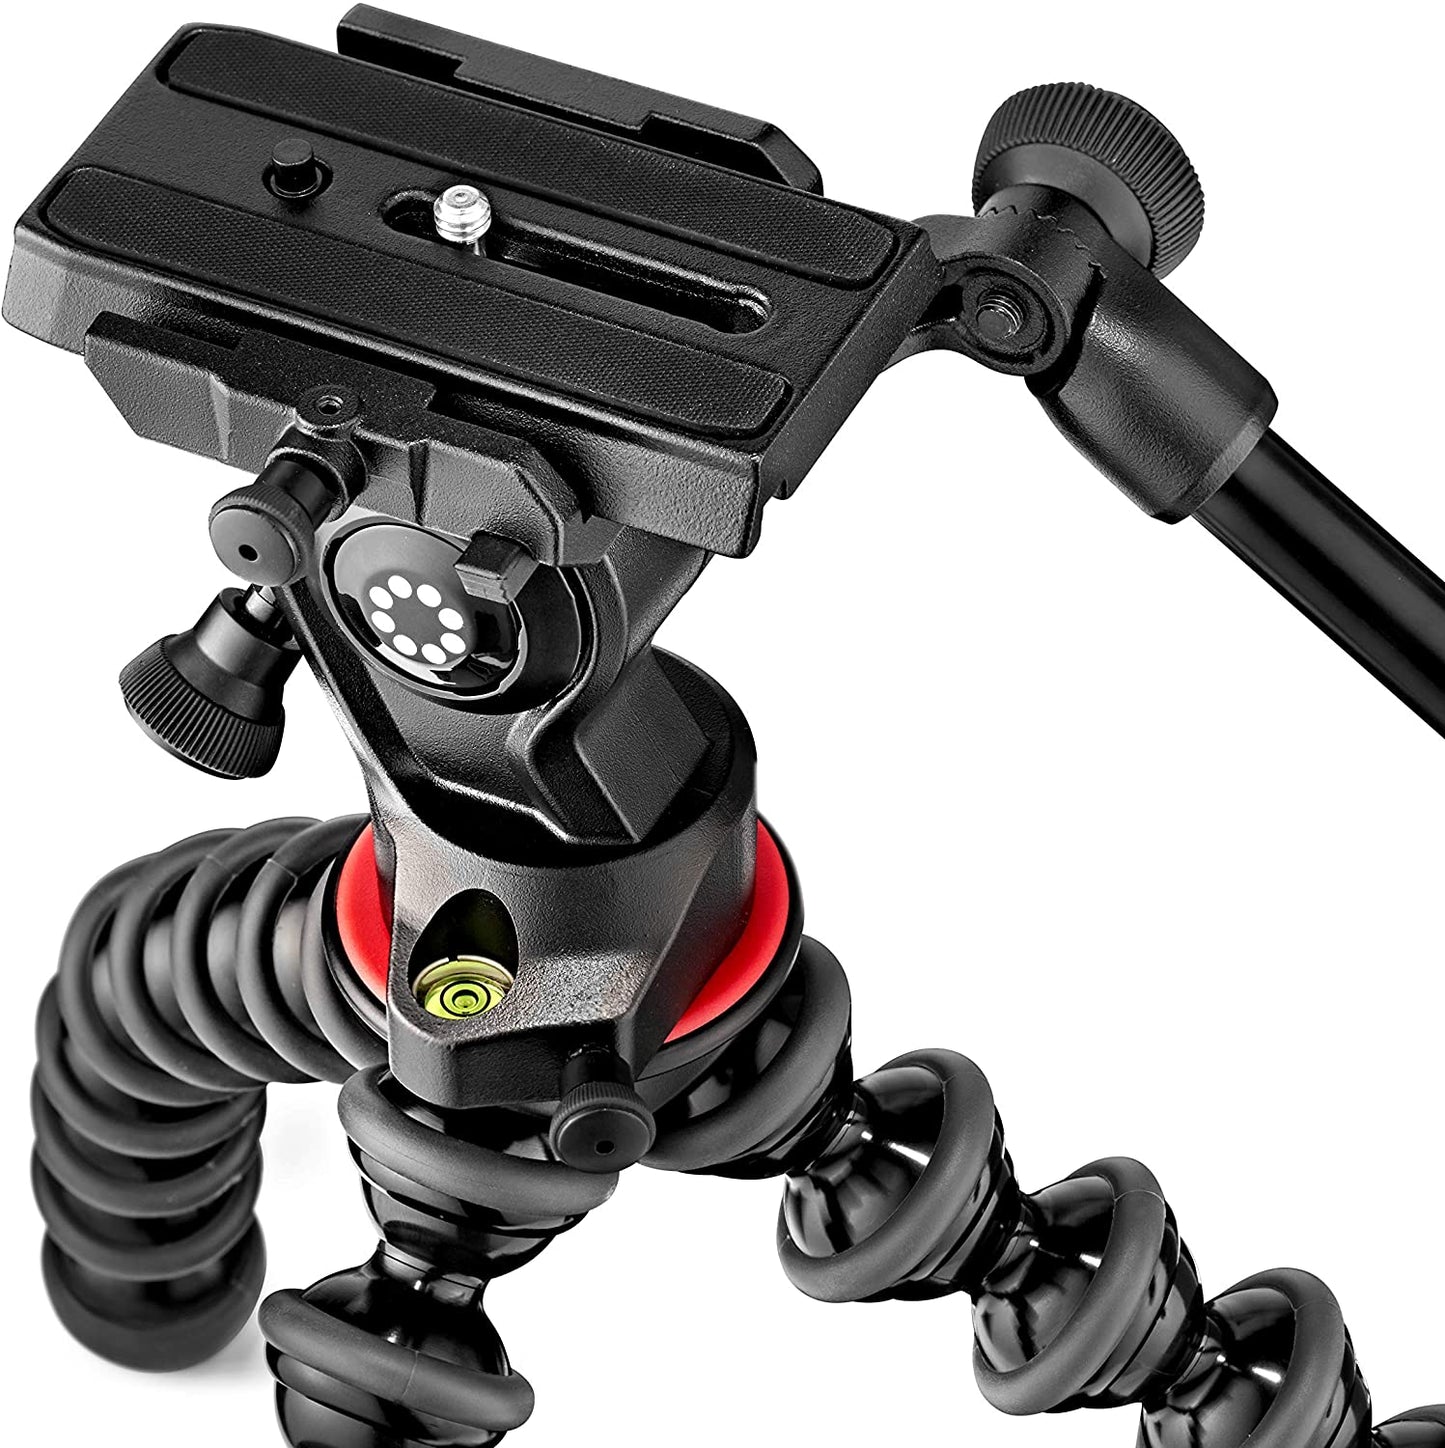 JOBY 1561 GorillaPod 5K Video PRO Professional Video Head Kit Camera Tripod Stand with Smooth Pan and Tilt Movements for DSLR and Mirrorless Camera